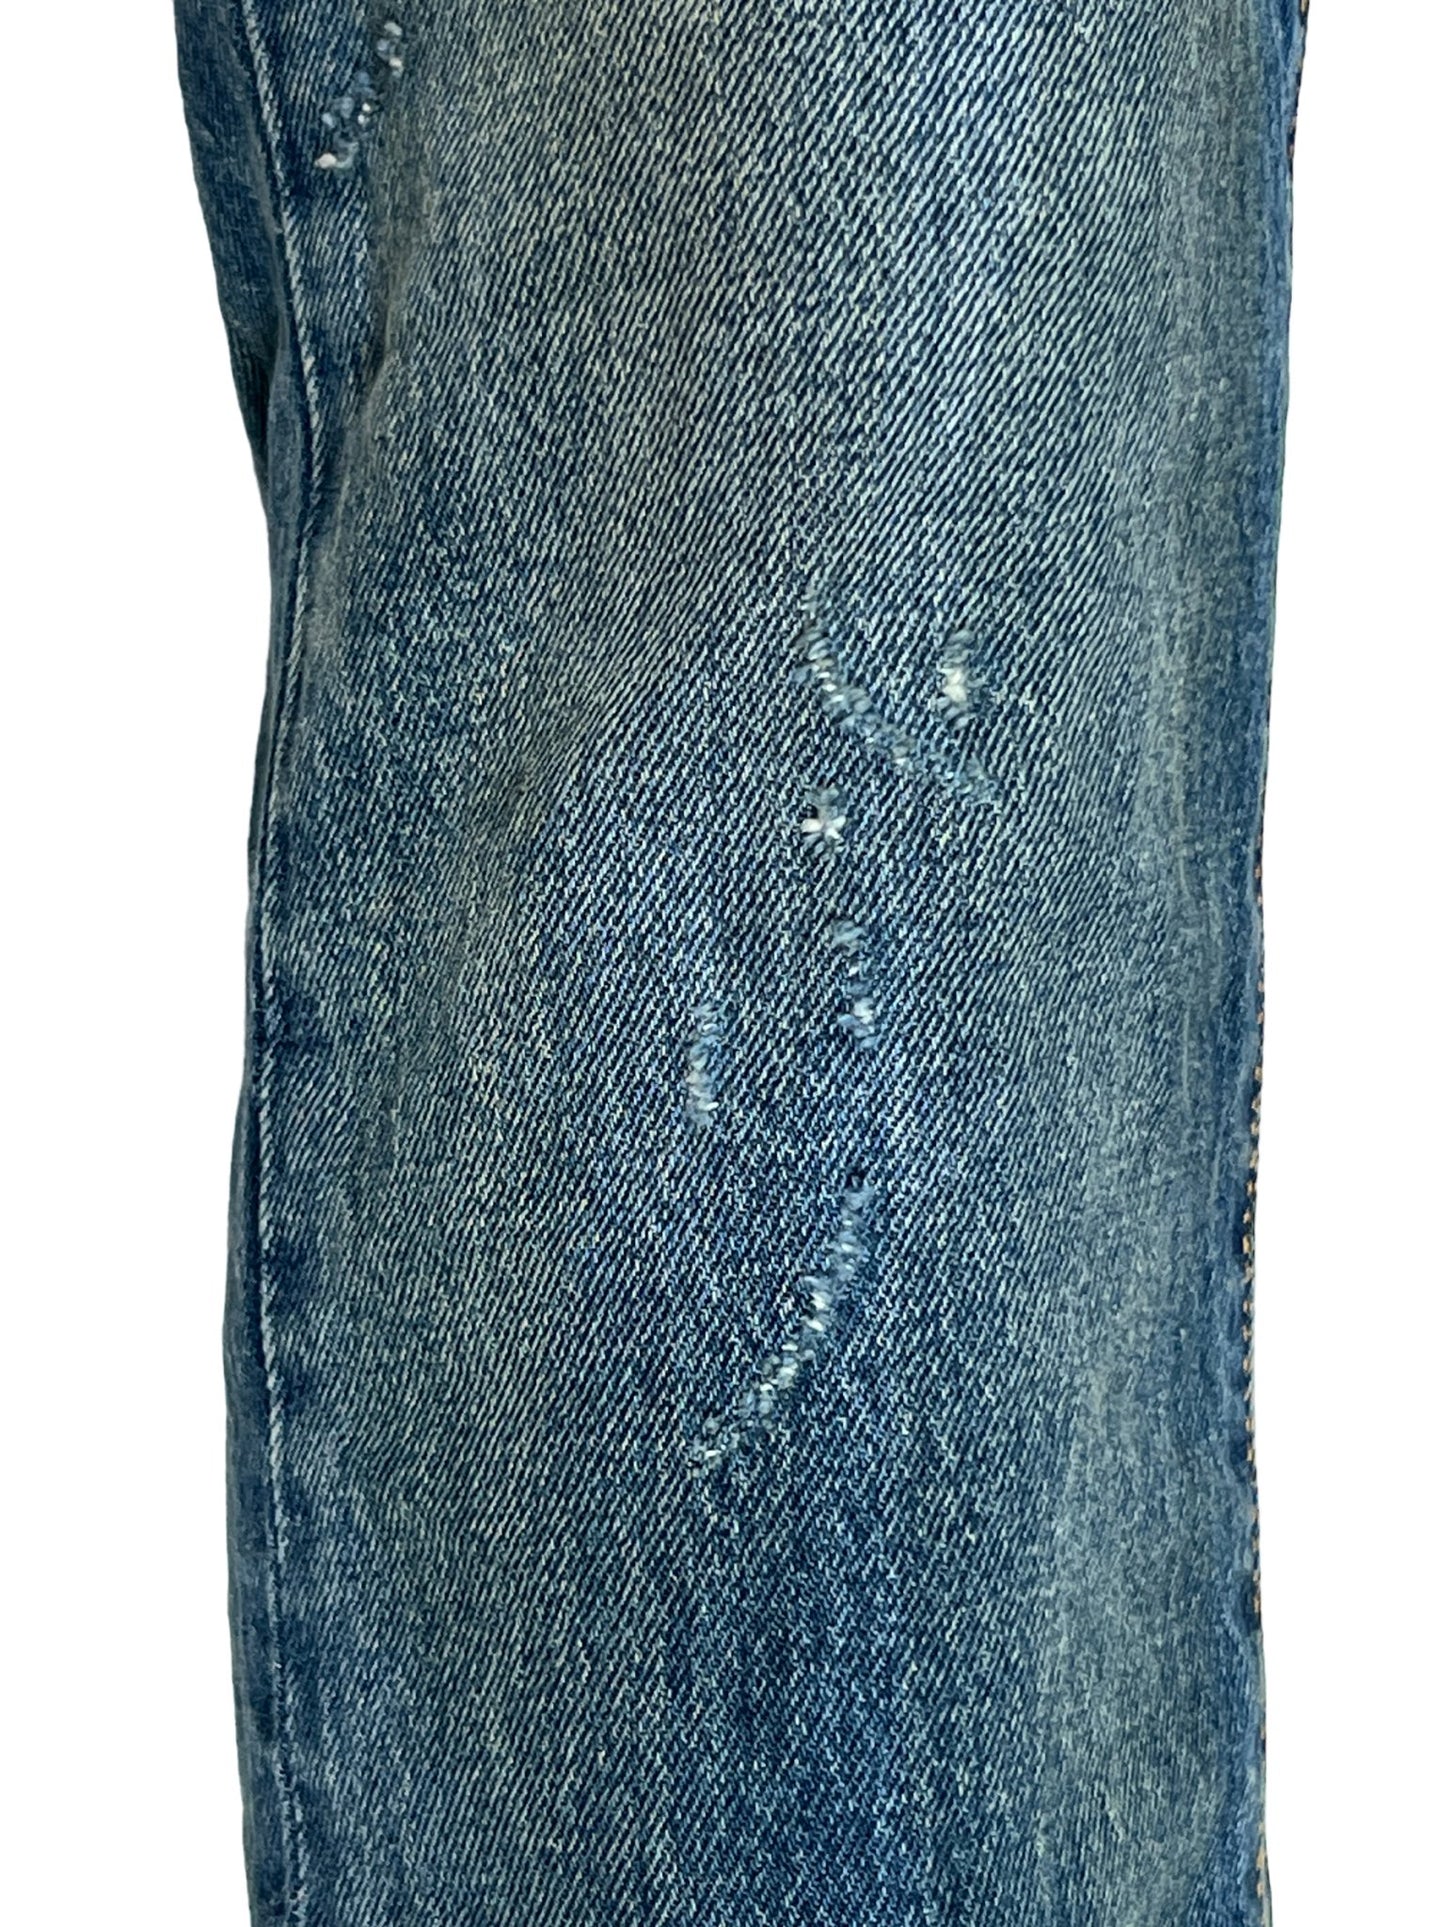 A pair of Purple Brand P001-DPMI Dirty Patina DK Indigo stretch denim jeans with holes in them.